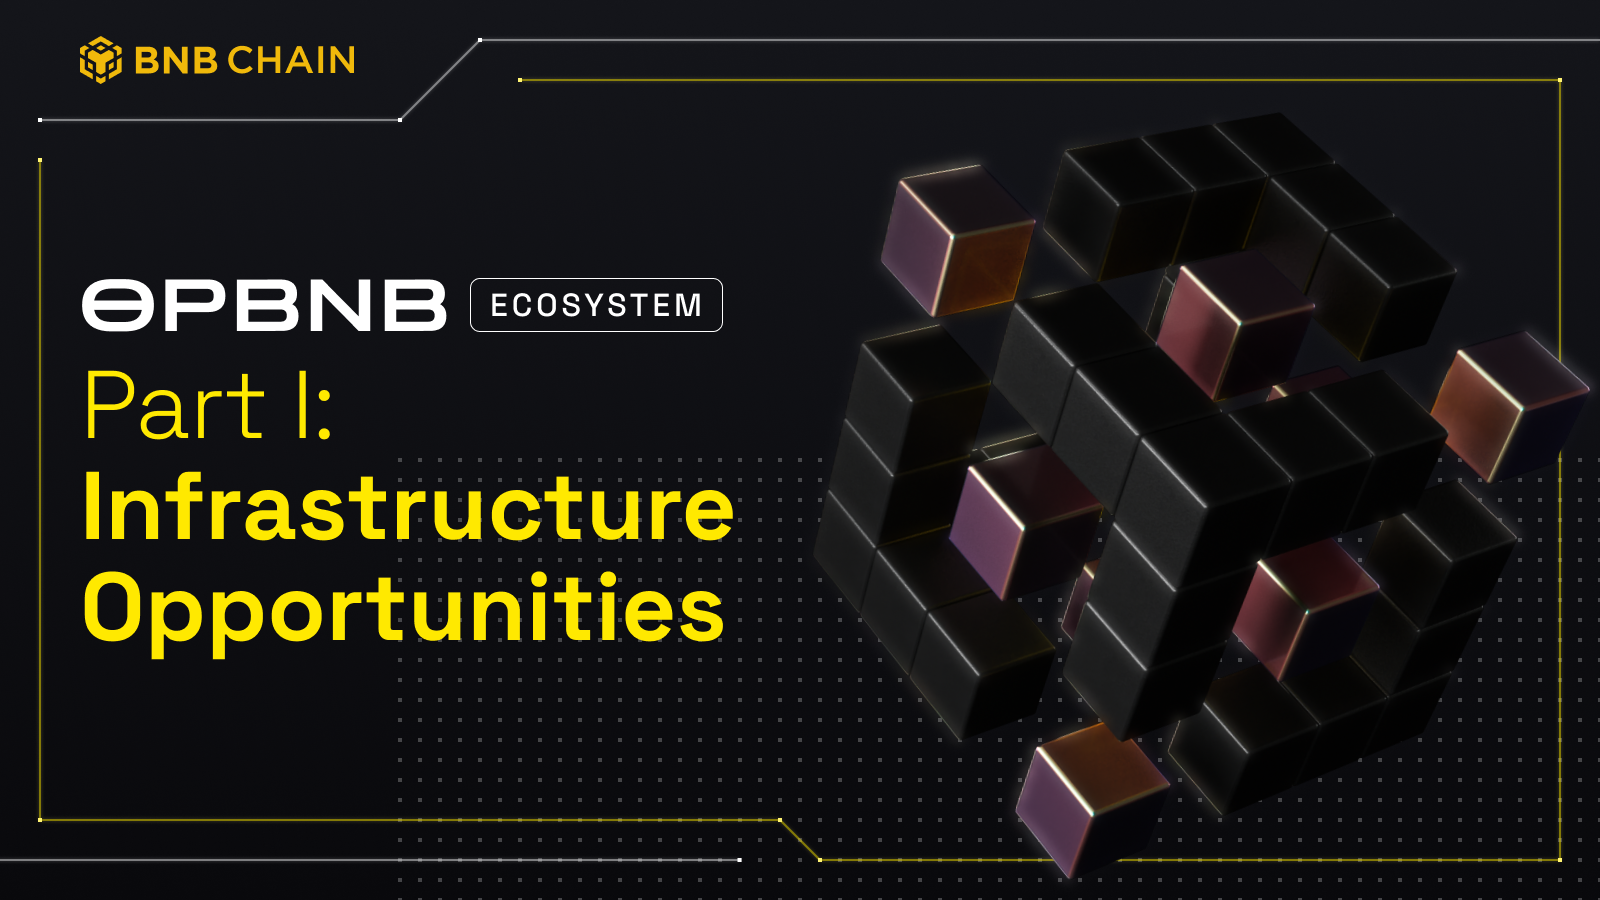 OpBNB Ecosystem Part I: Infrastructure Opportunities